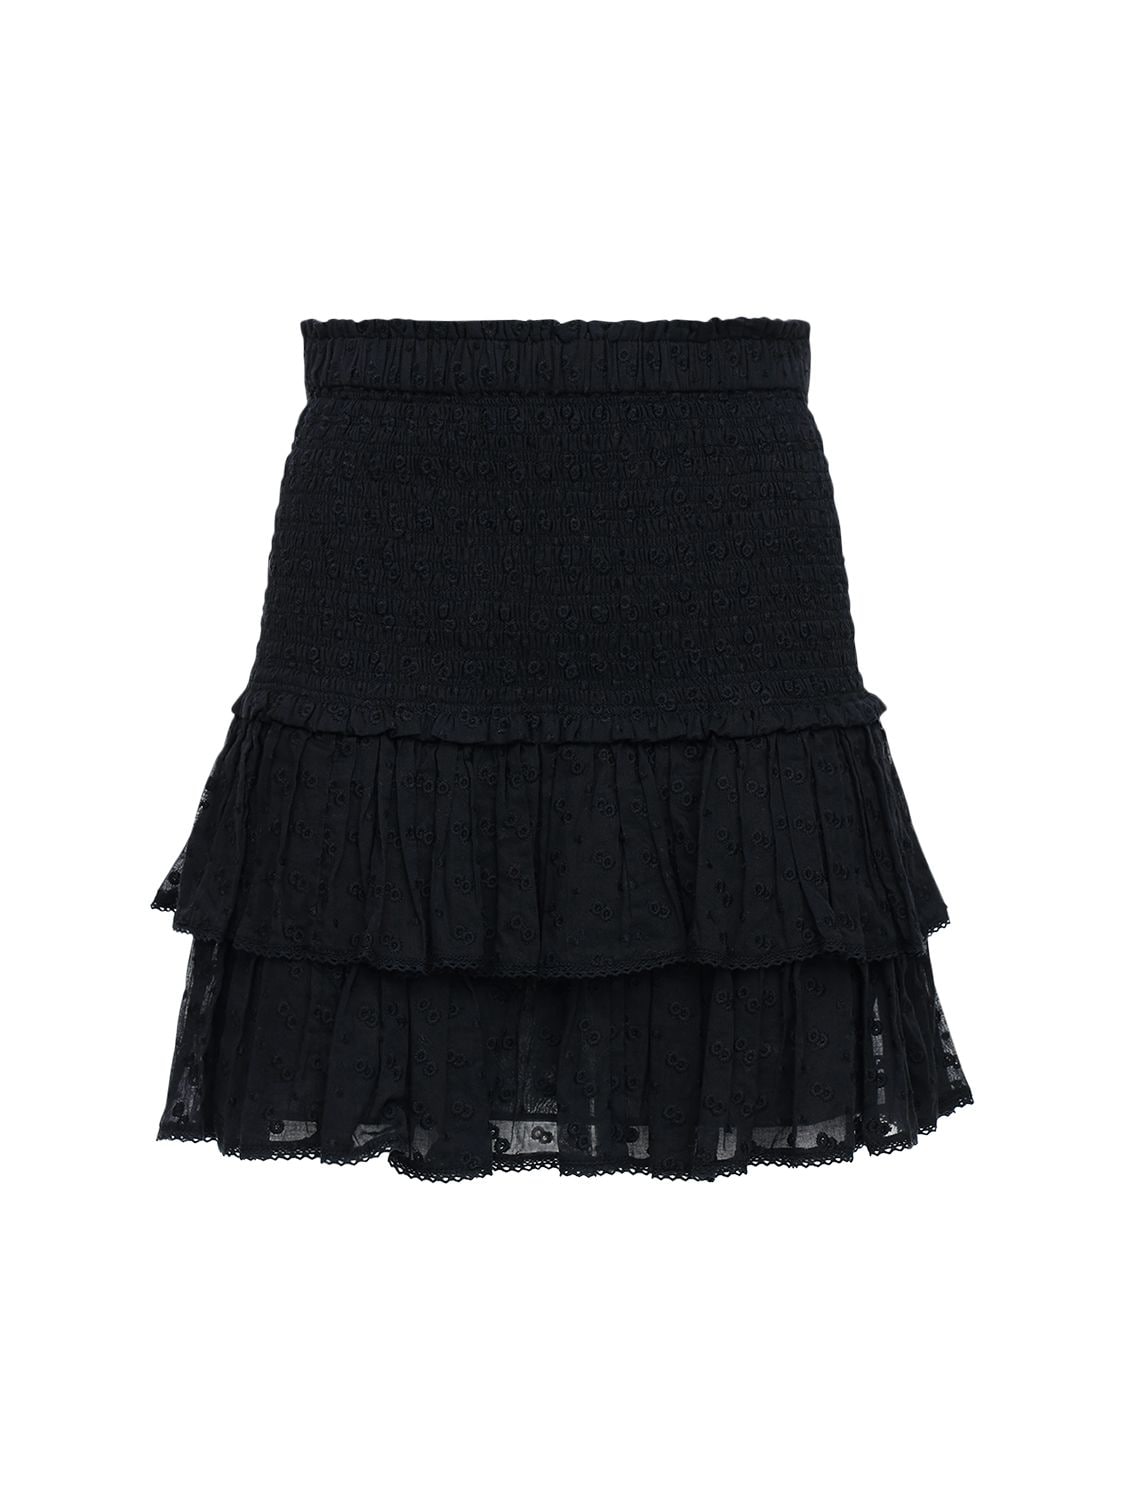 ISABEL MARANT ÉTOILE TINAOMI EMBROIDERED COTTON MINI SKIRT,73IE1B070-MDFCSW2